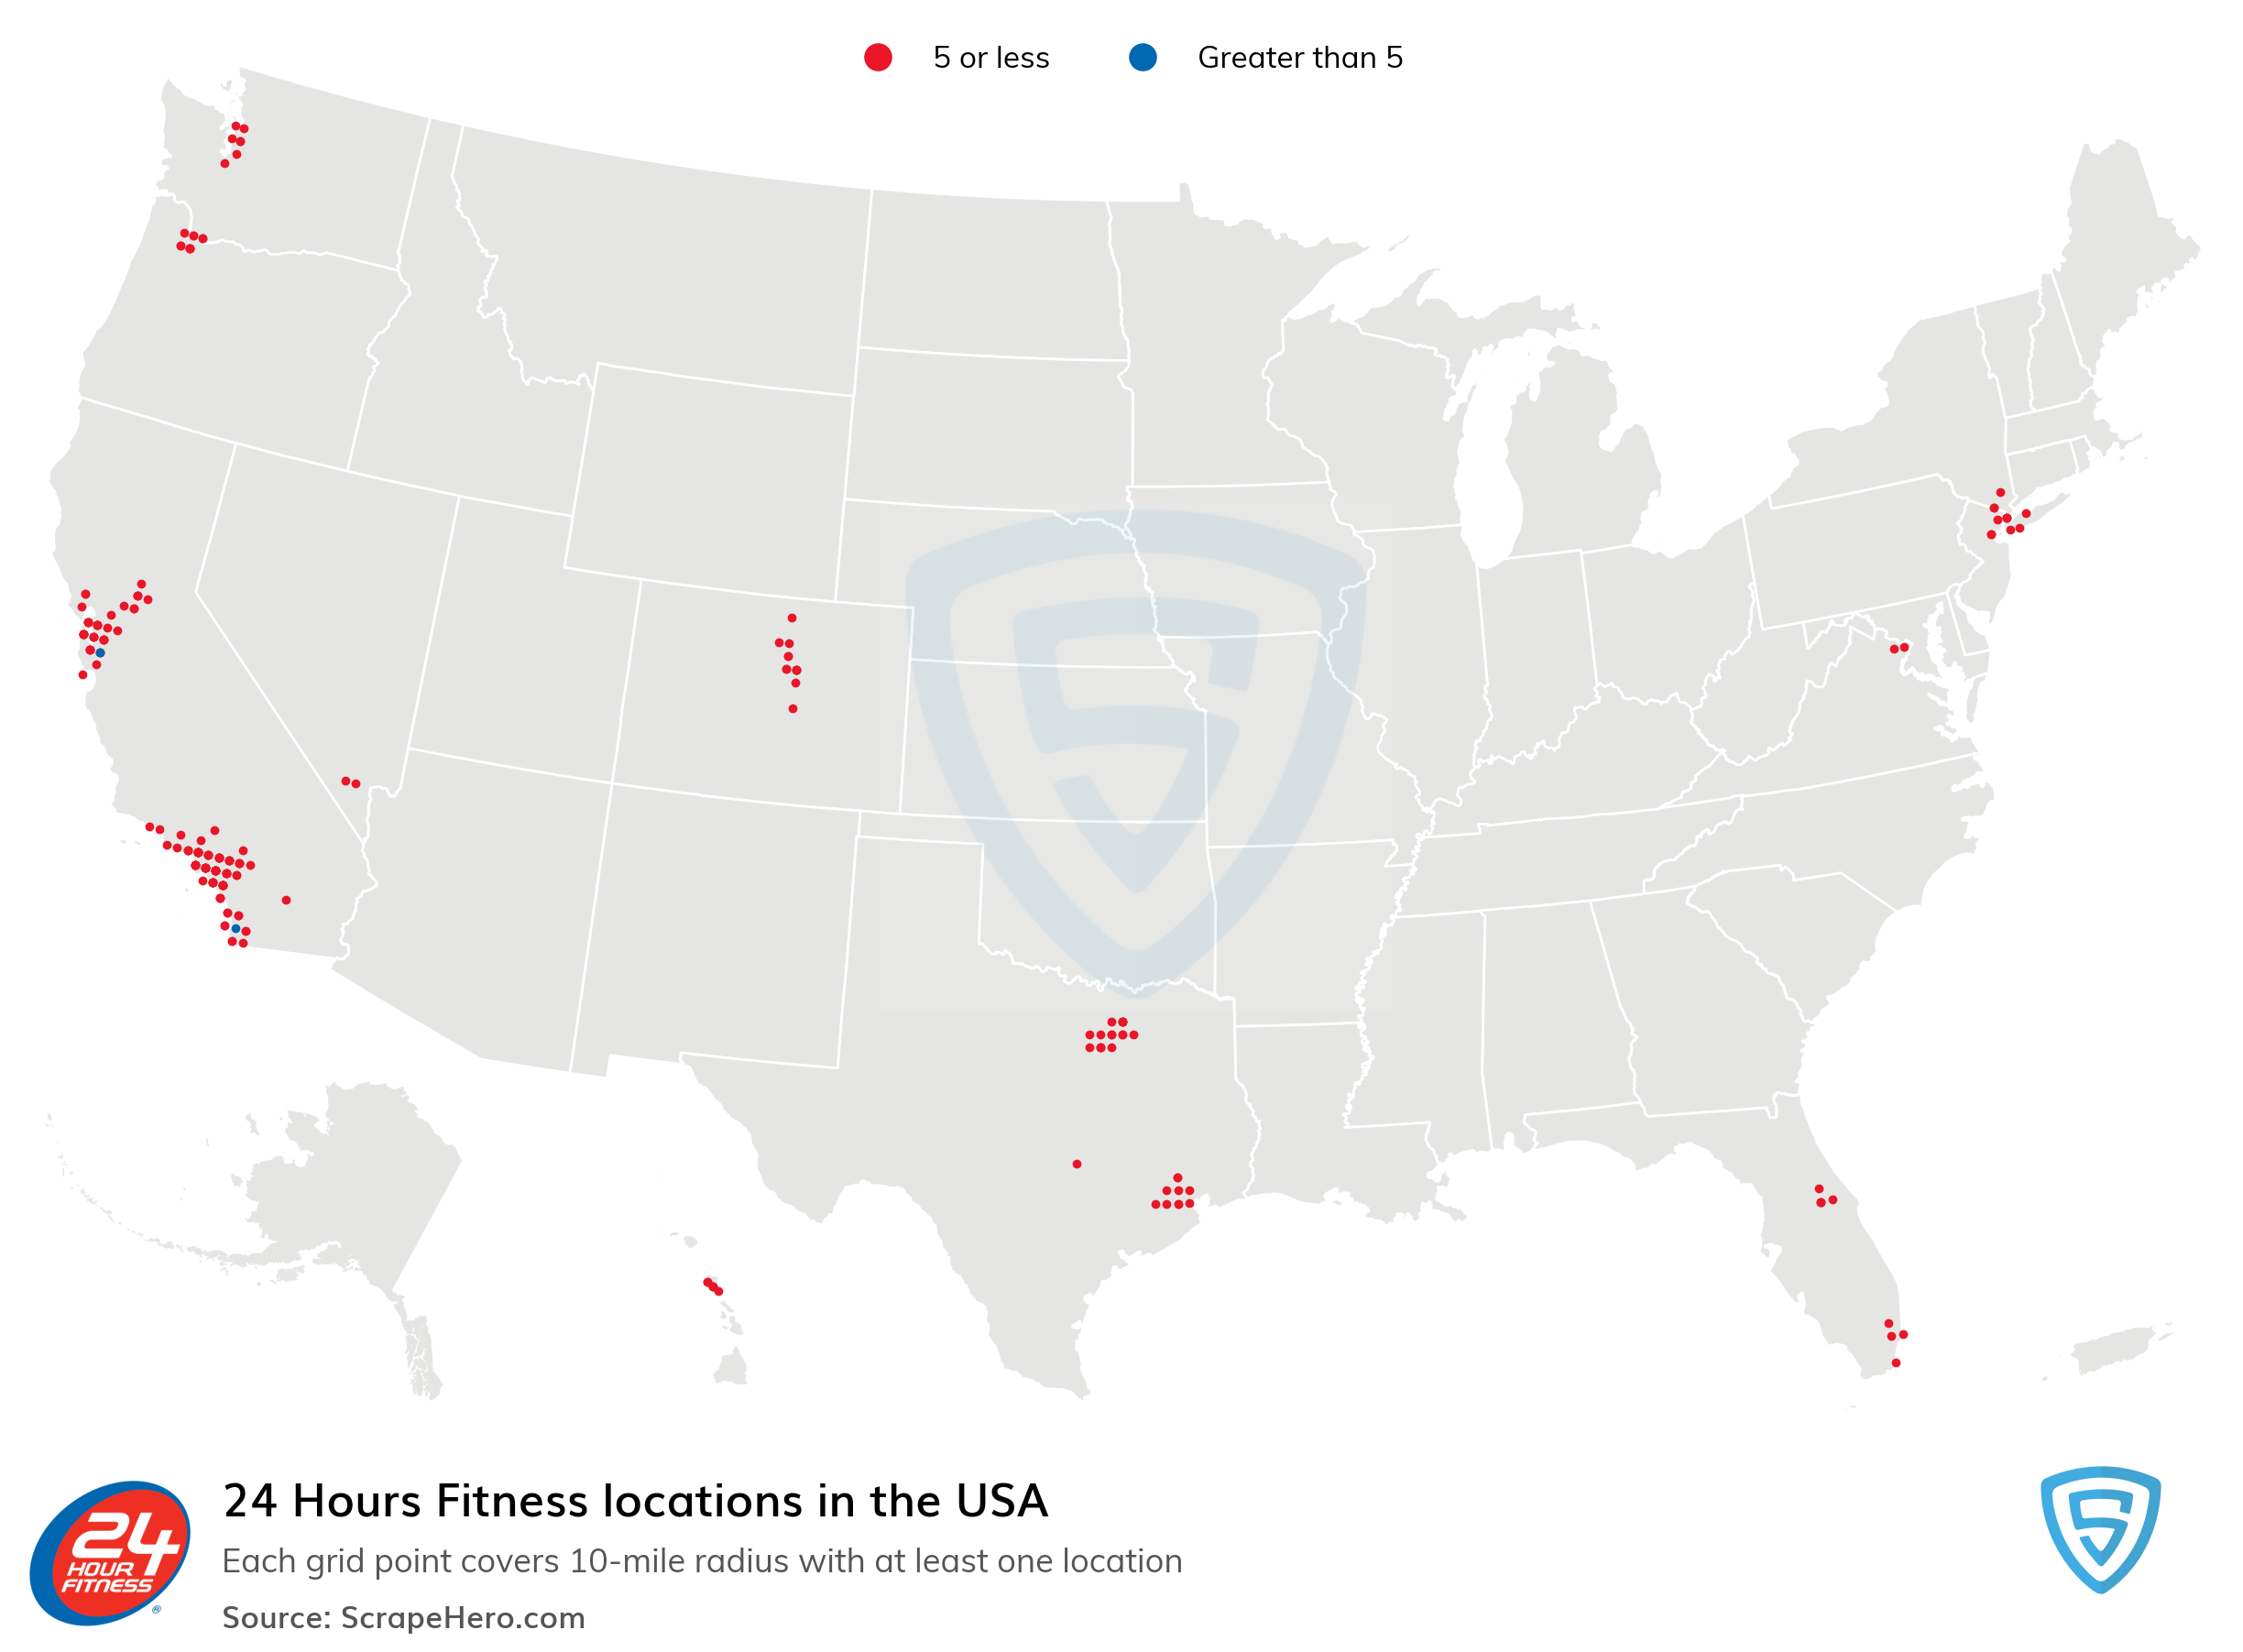 24 hour fitness location map